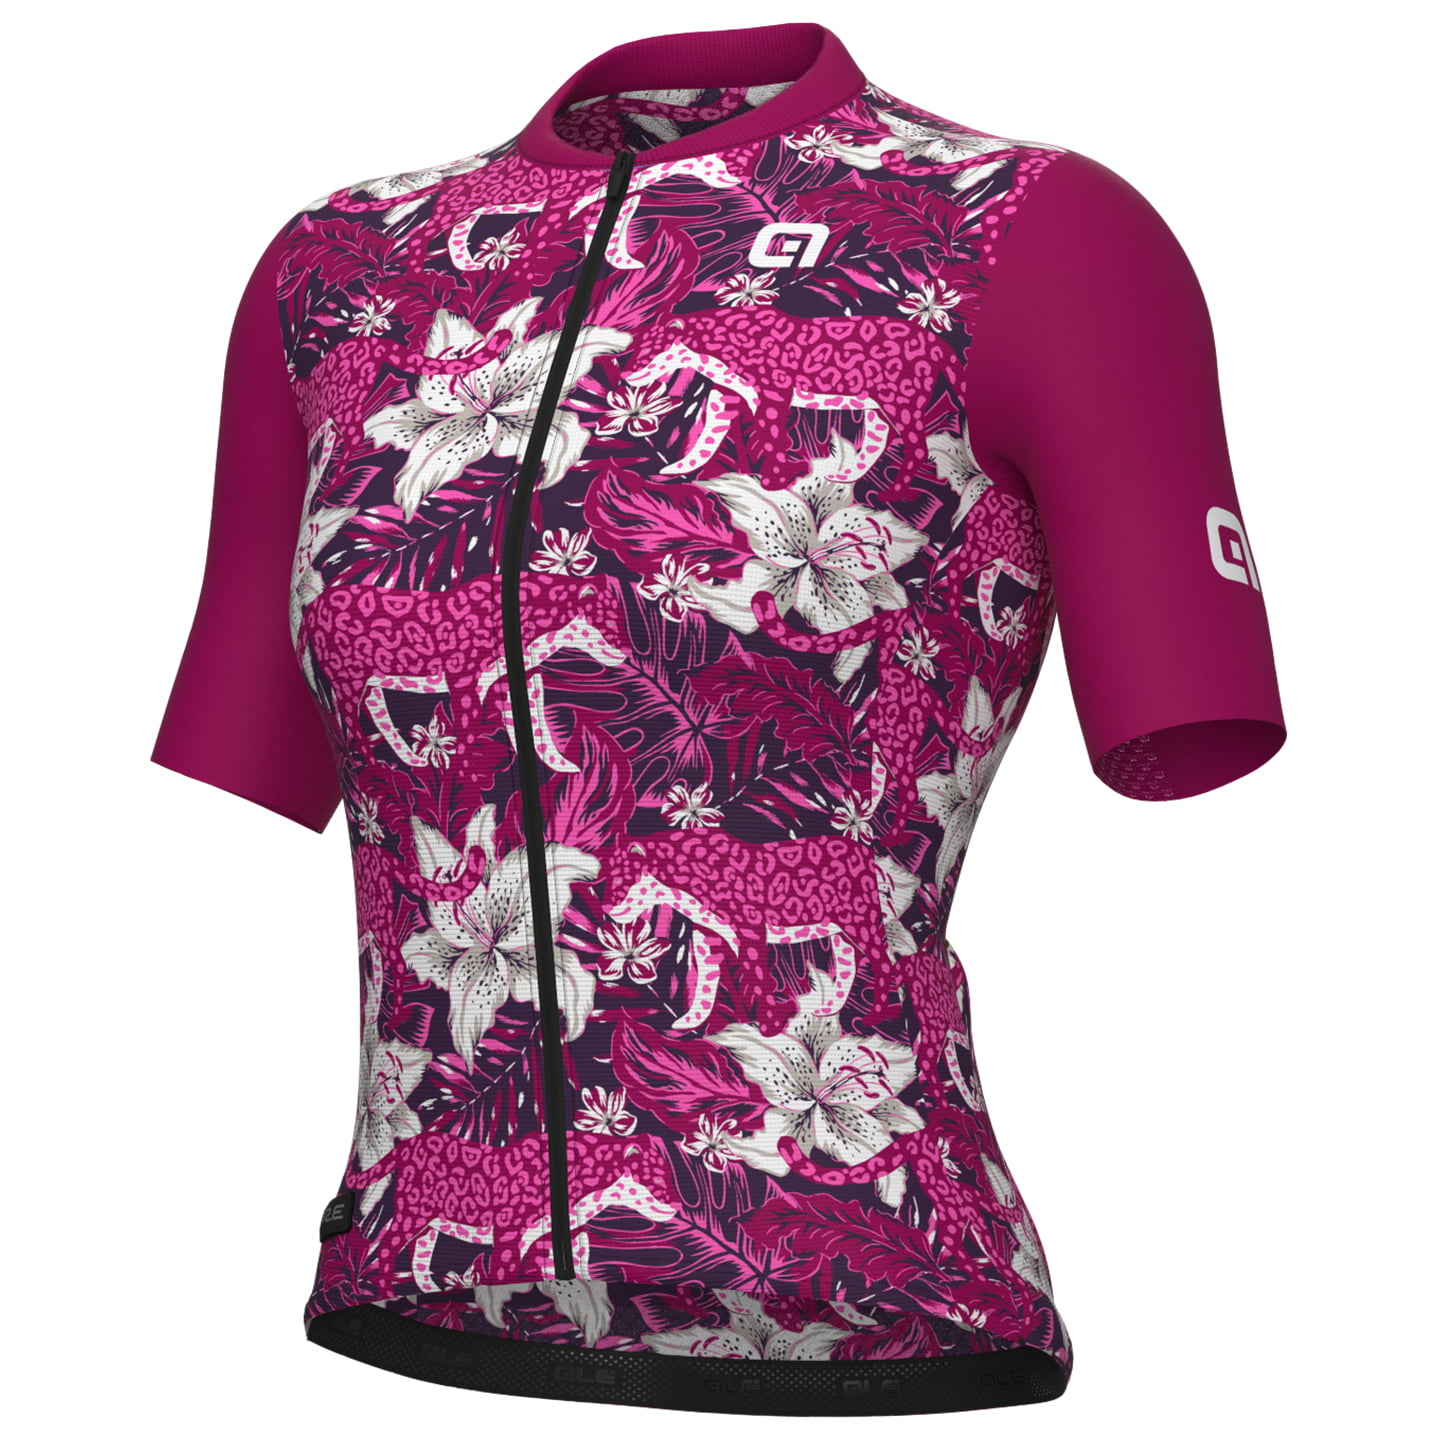 ALE Hibiscus Women’s Jersey Women’s Short Sleeve Jersey, size L, Cycling jersey, Cycling clothing